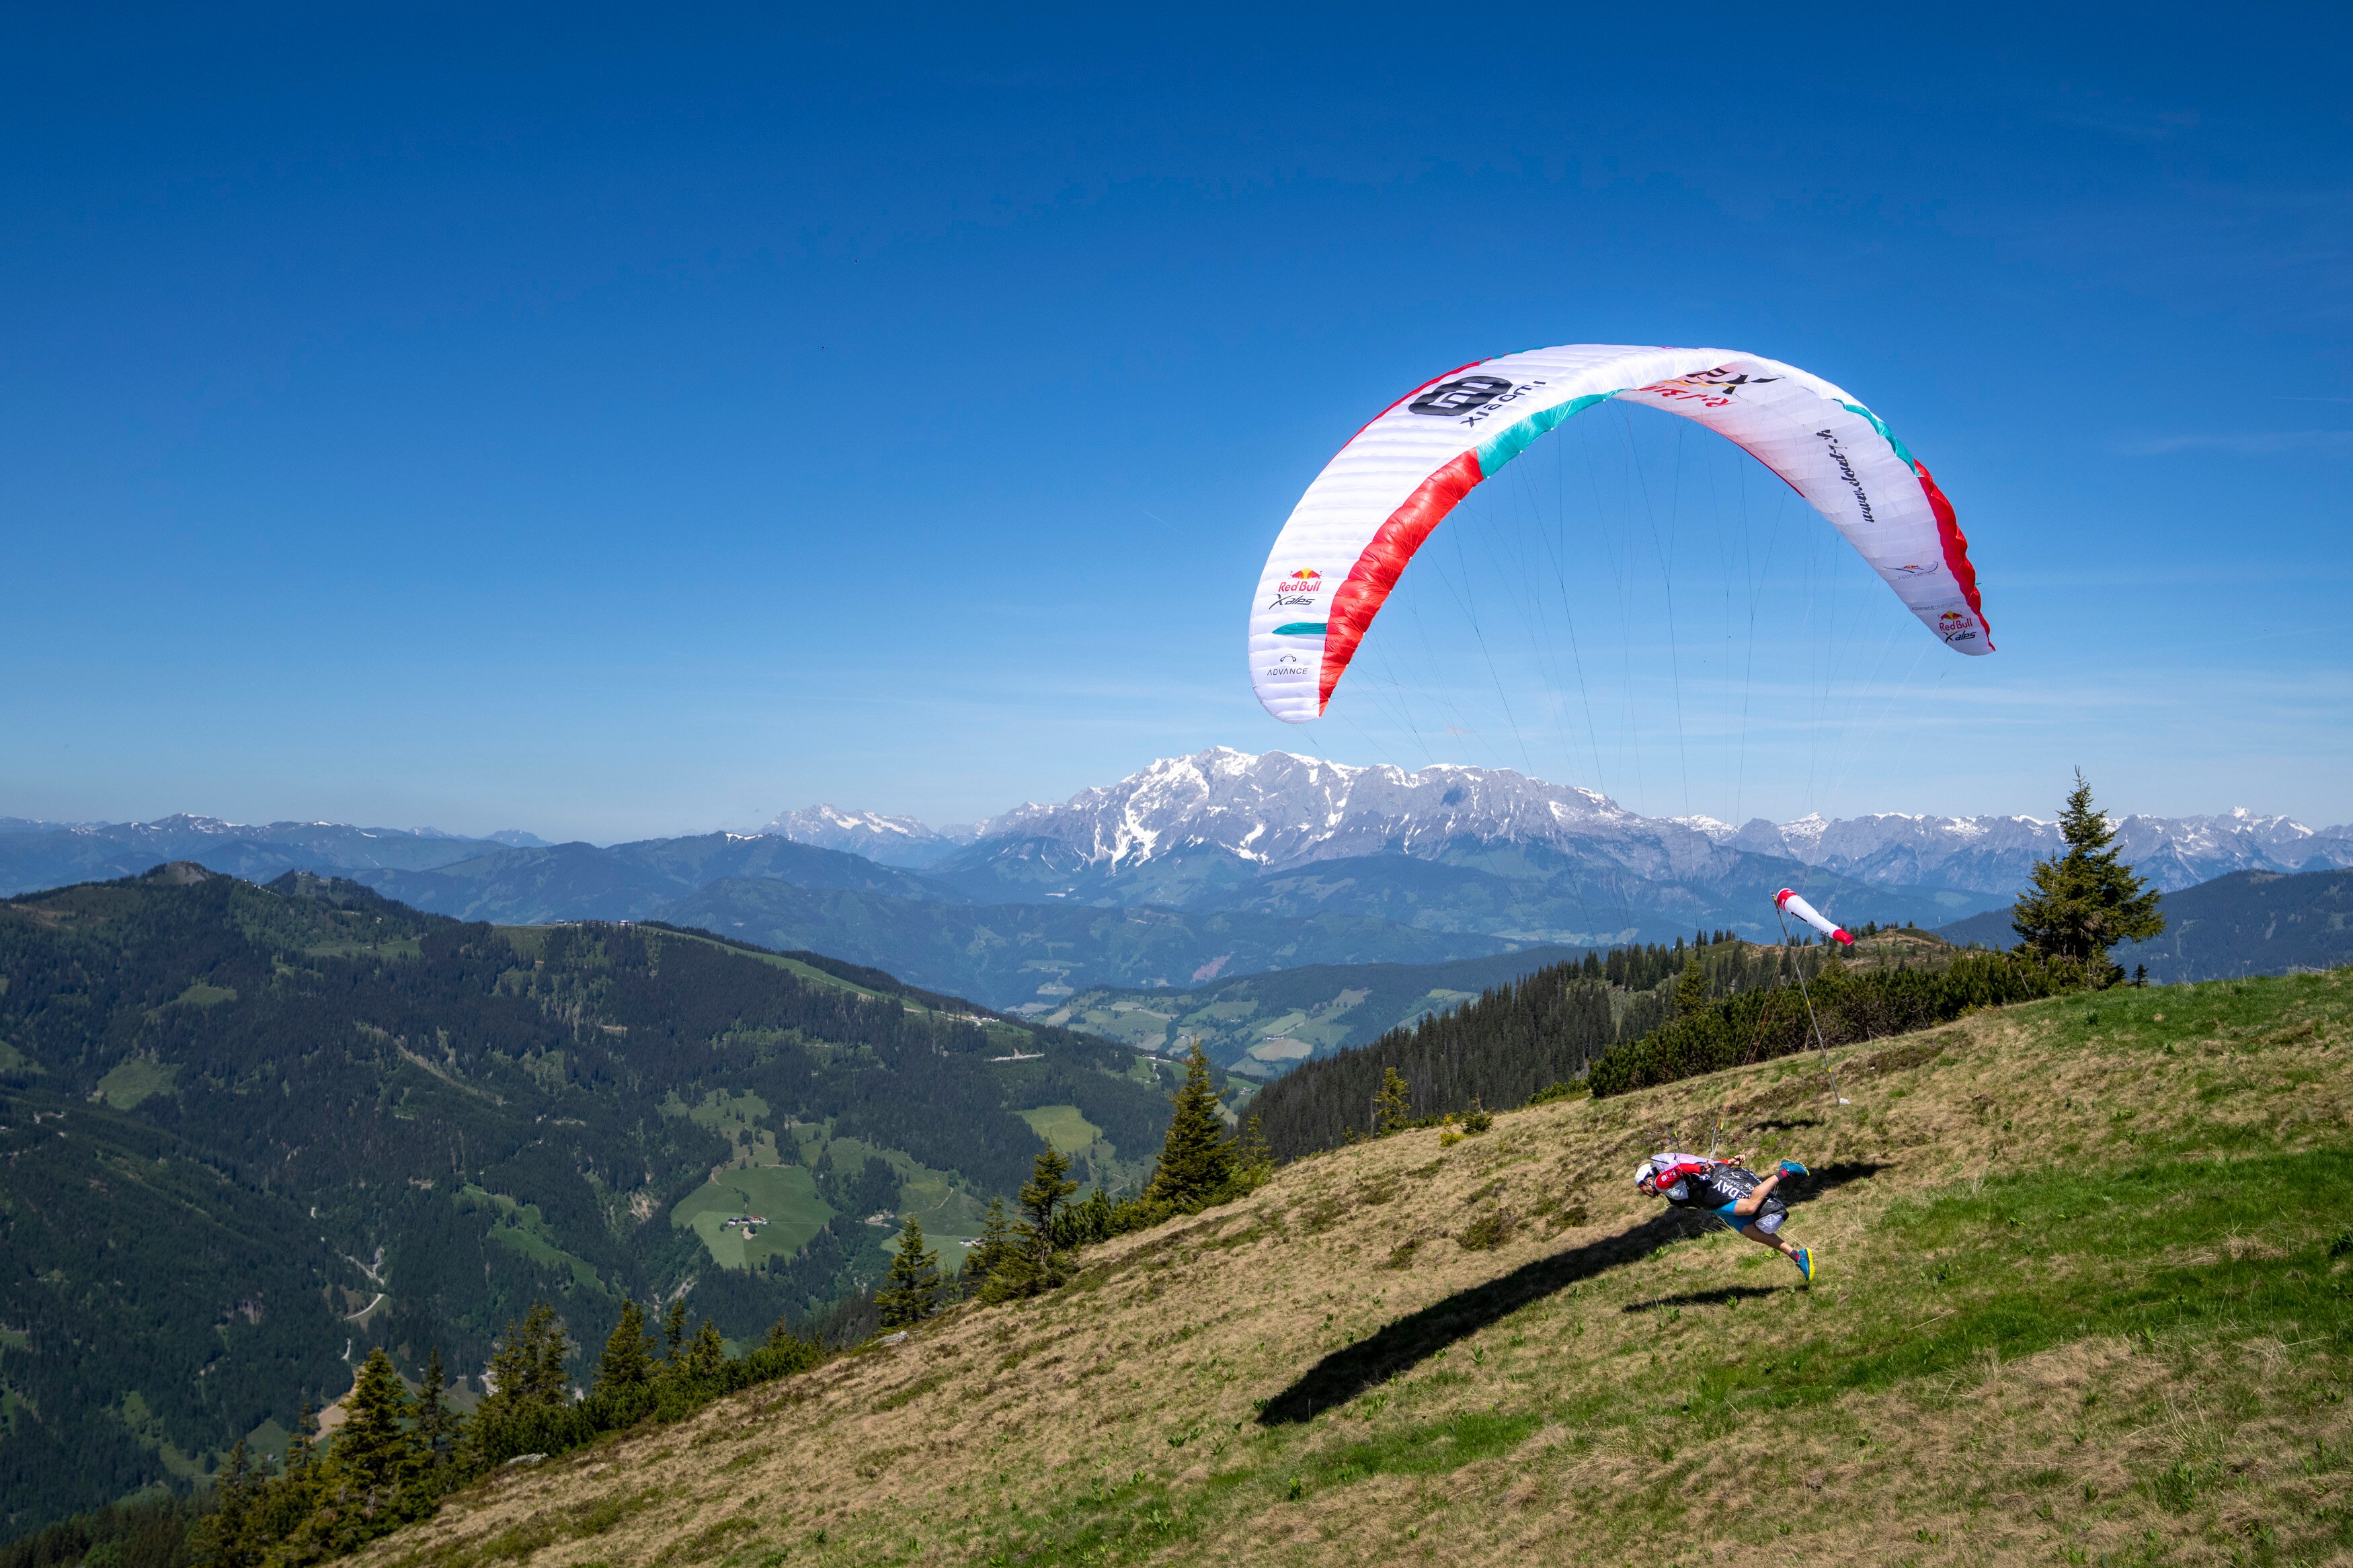 SUI2 performs during the Red Bull X-Alps pre-shooting in Kleinarl, Austria on June 15, 2021.